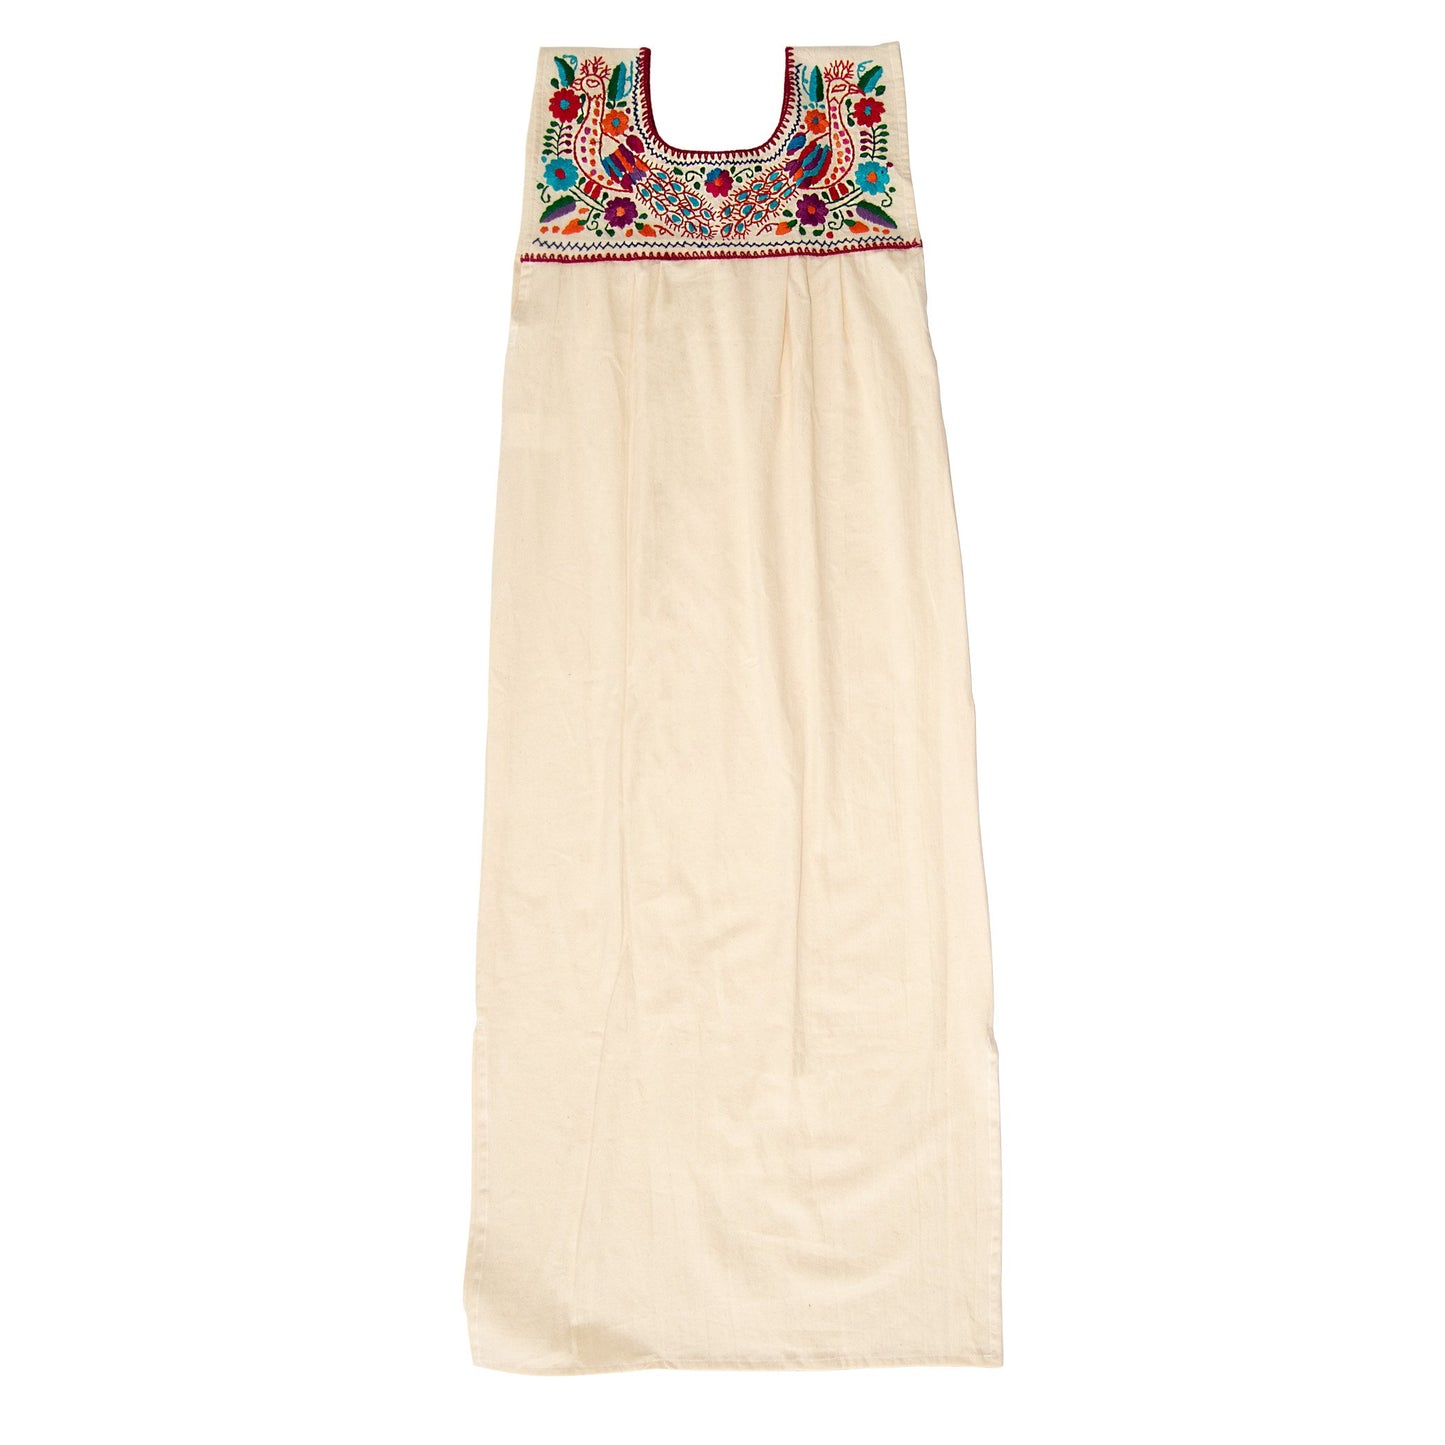 Maxi Isidra Mexican Embroidered Boho Dress